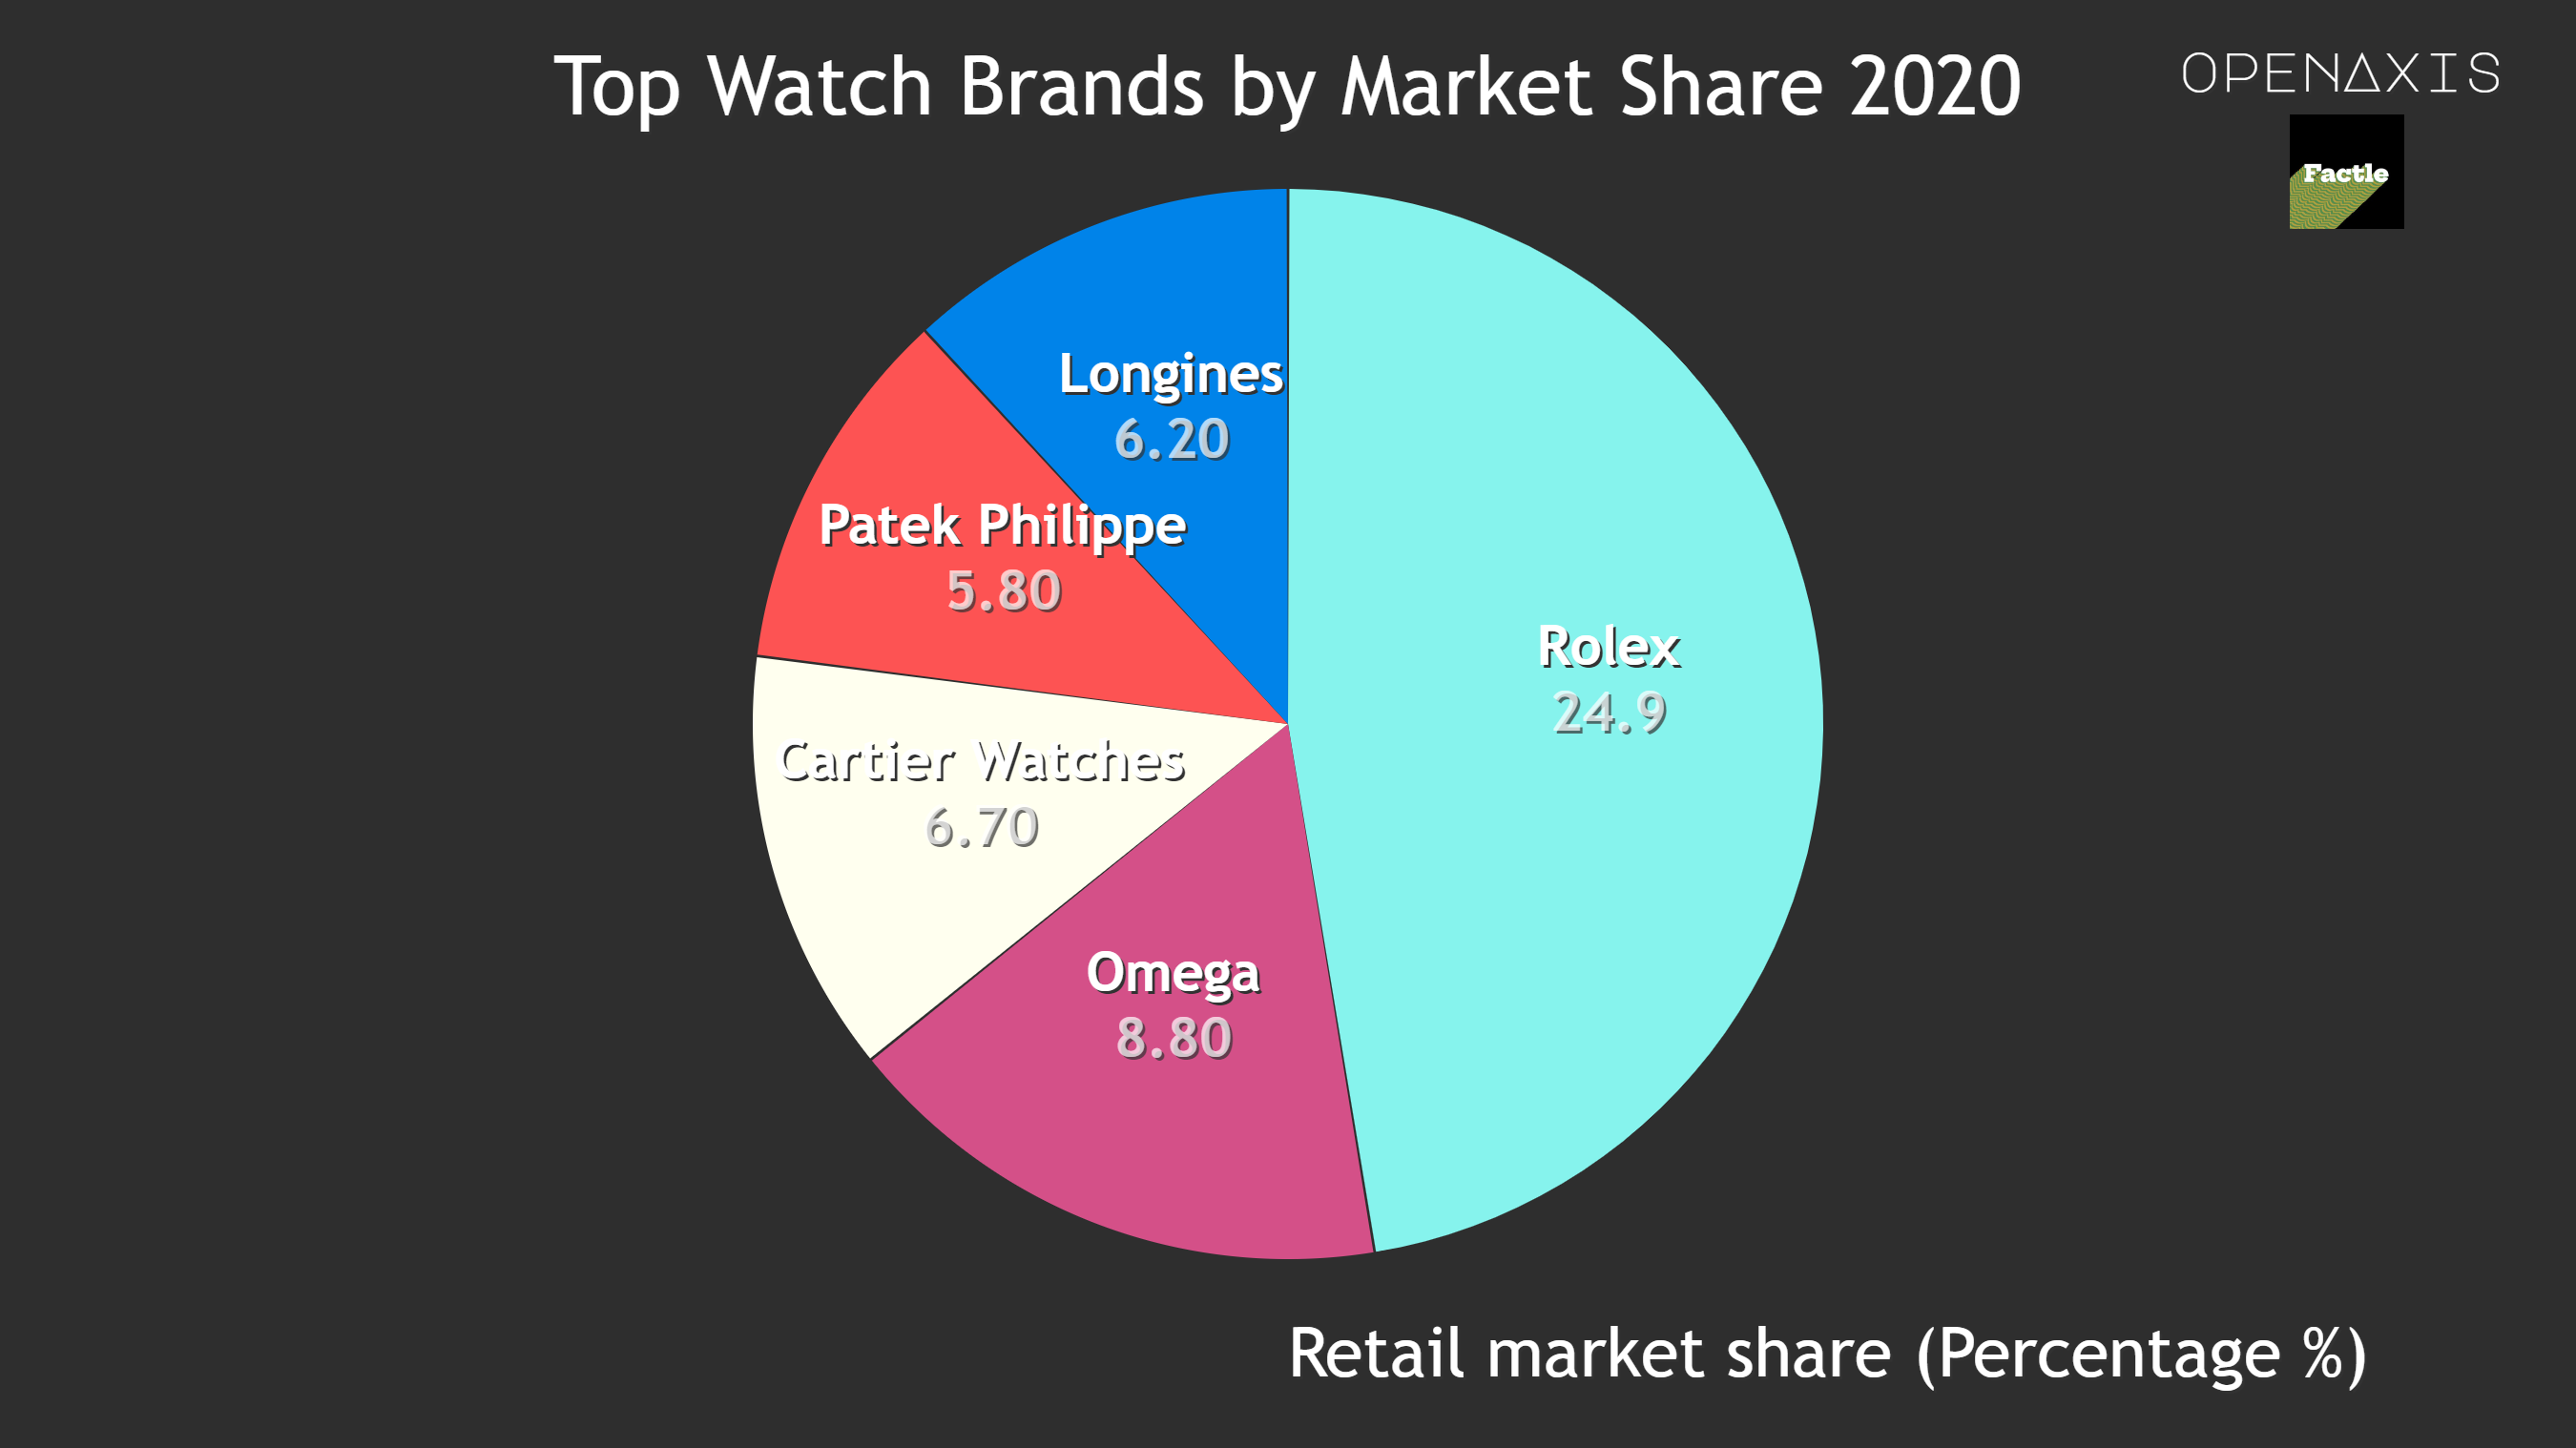 <p>Rolex tops the list with a market share of almost 25%. In 2020, for the first time ever (at least according to Morgan Stanley), the Rolex Group (Rolex + Tudor), has become more successful than the entire Swatch Group conglomerate with its 27% share of the market. </p><p>﻿<a href="/search?q=%23watches" target="_blank">#watches</a>﻿ ﻿<a href="/search?q=%23trivia" target="_blank">#trivia</a>﻿ #marketshare</p><p>Source: <a href="/data/3634" target="_blank">LuxeConsult, Morgan Stanley Research</a></p>